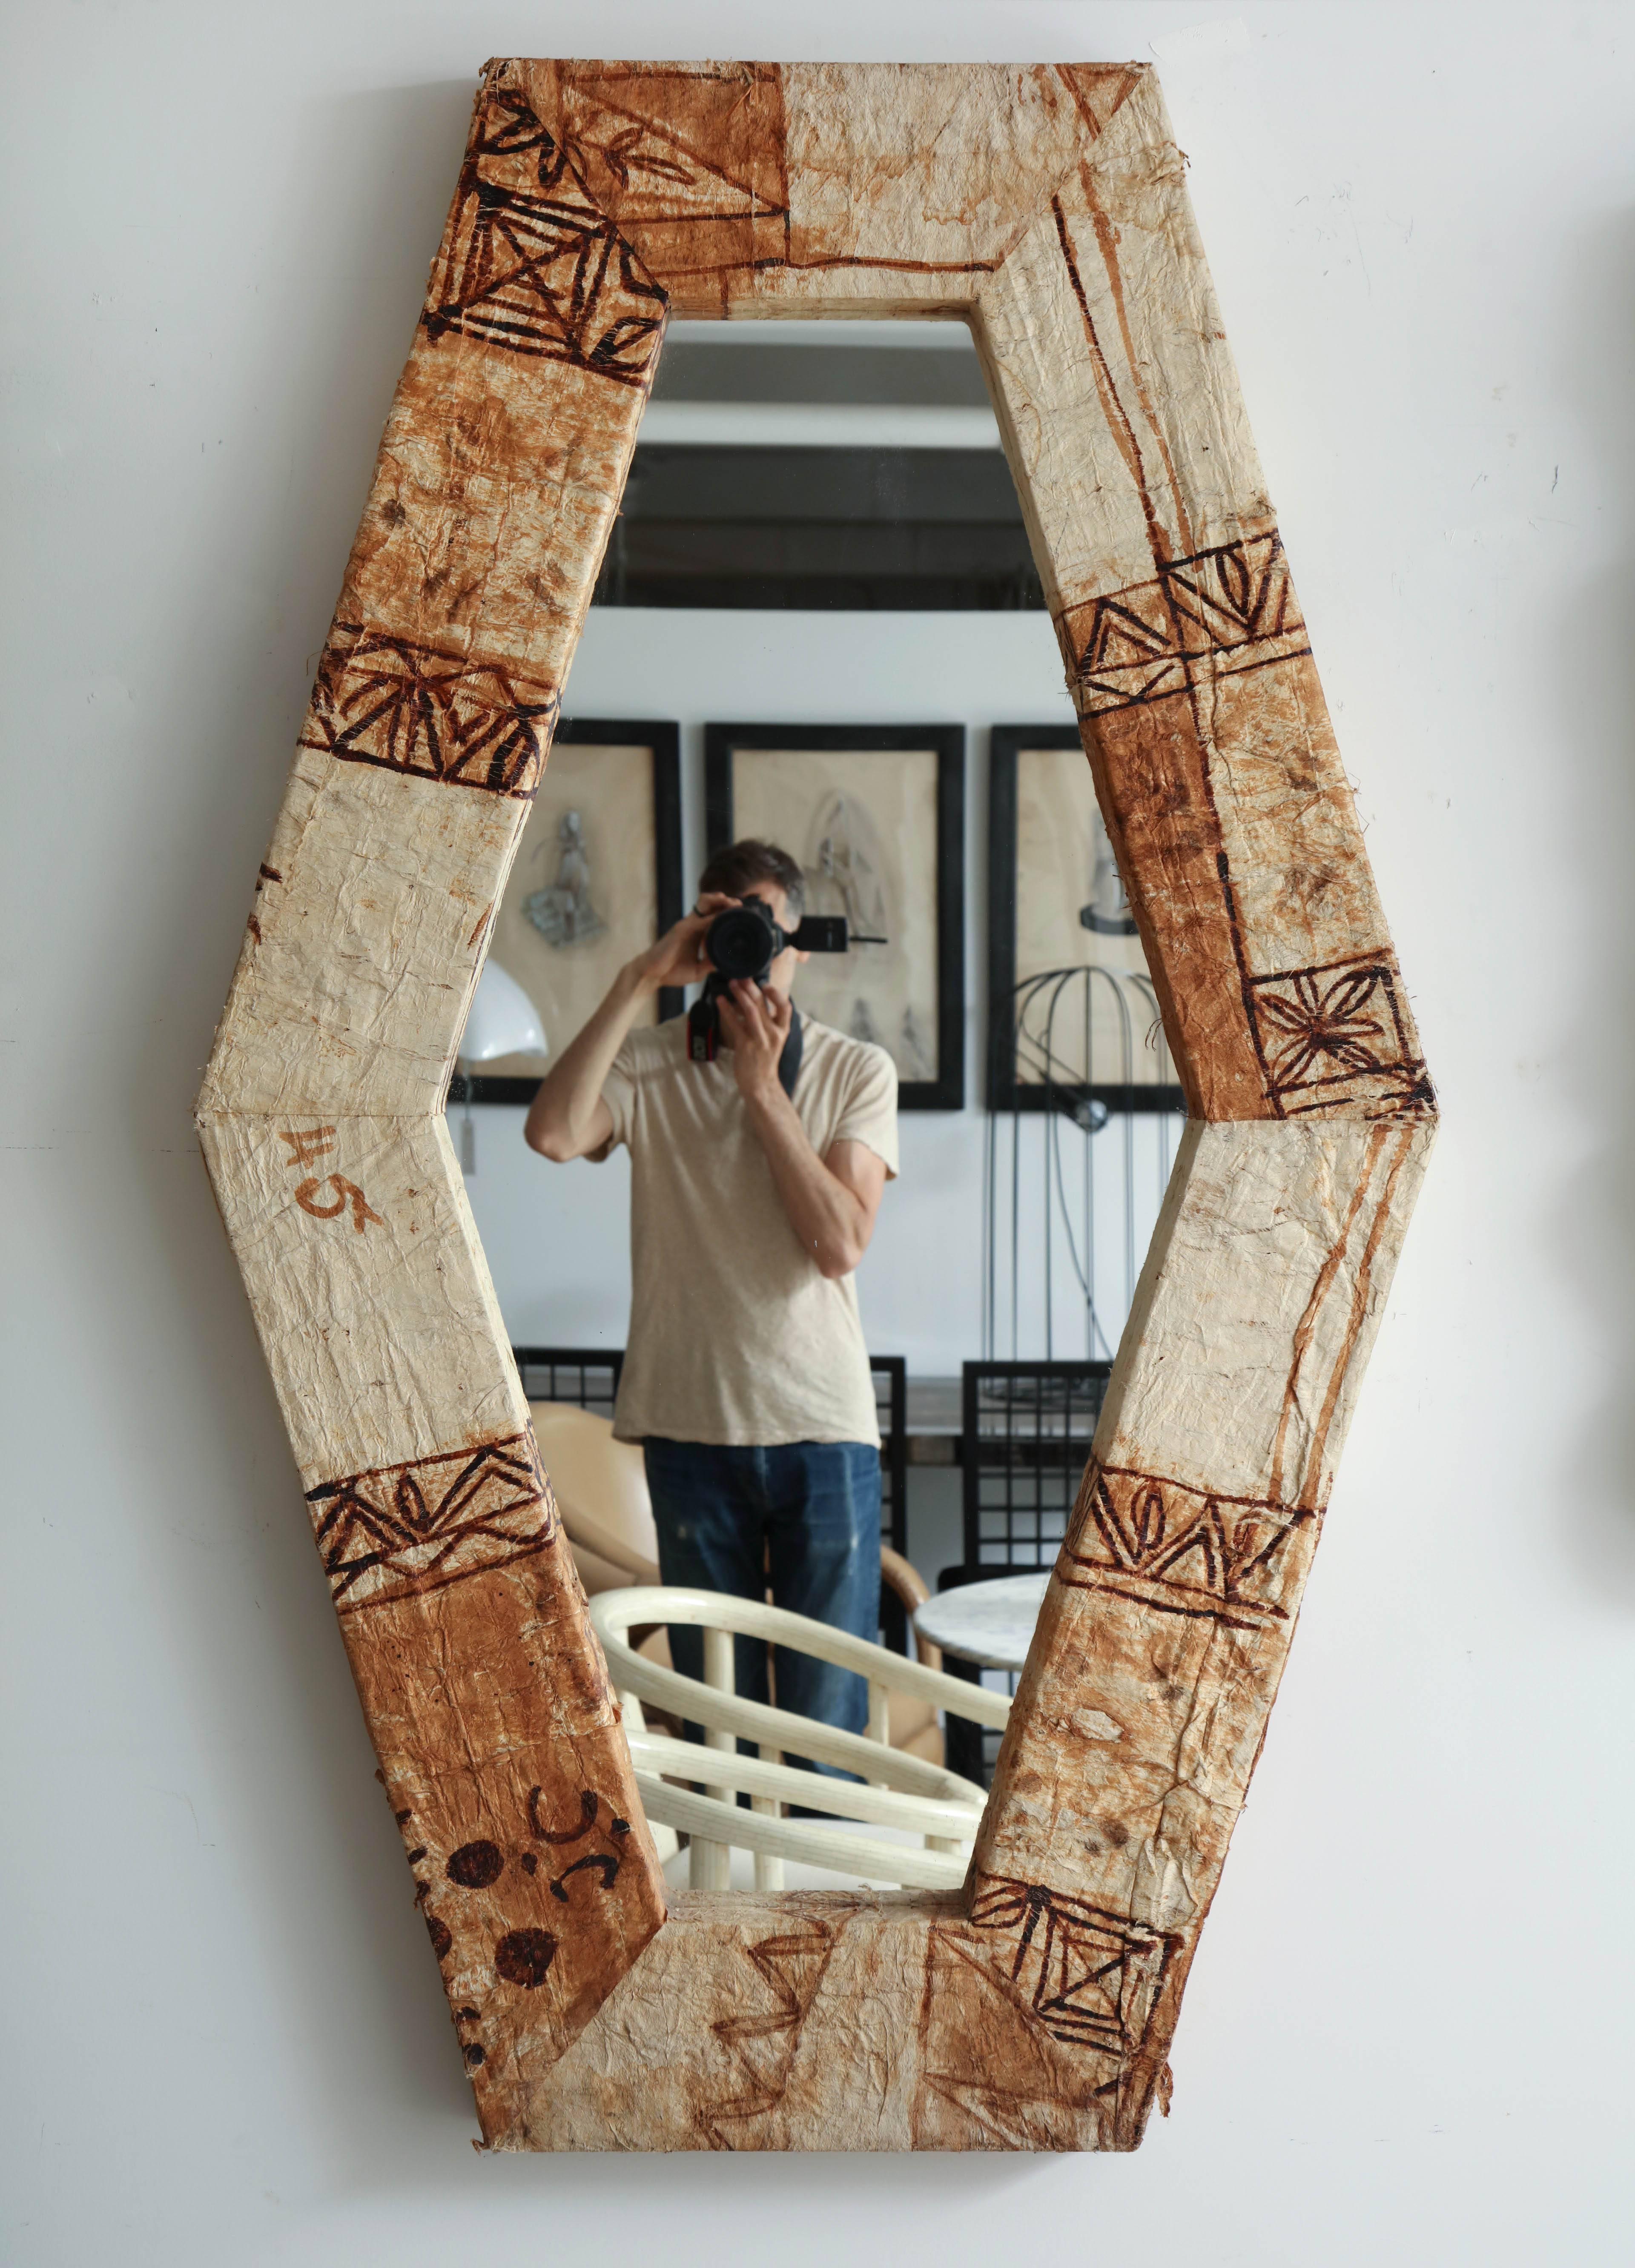 Six sided long mirror covered in tapa cloth from Polynesian Islands.